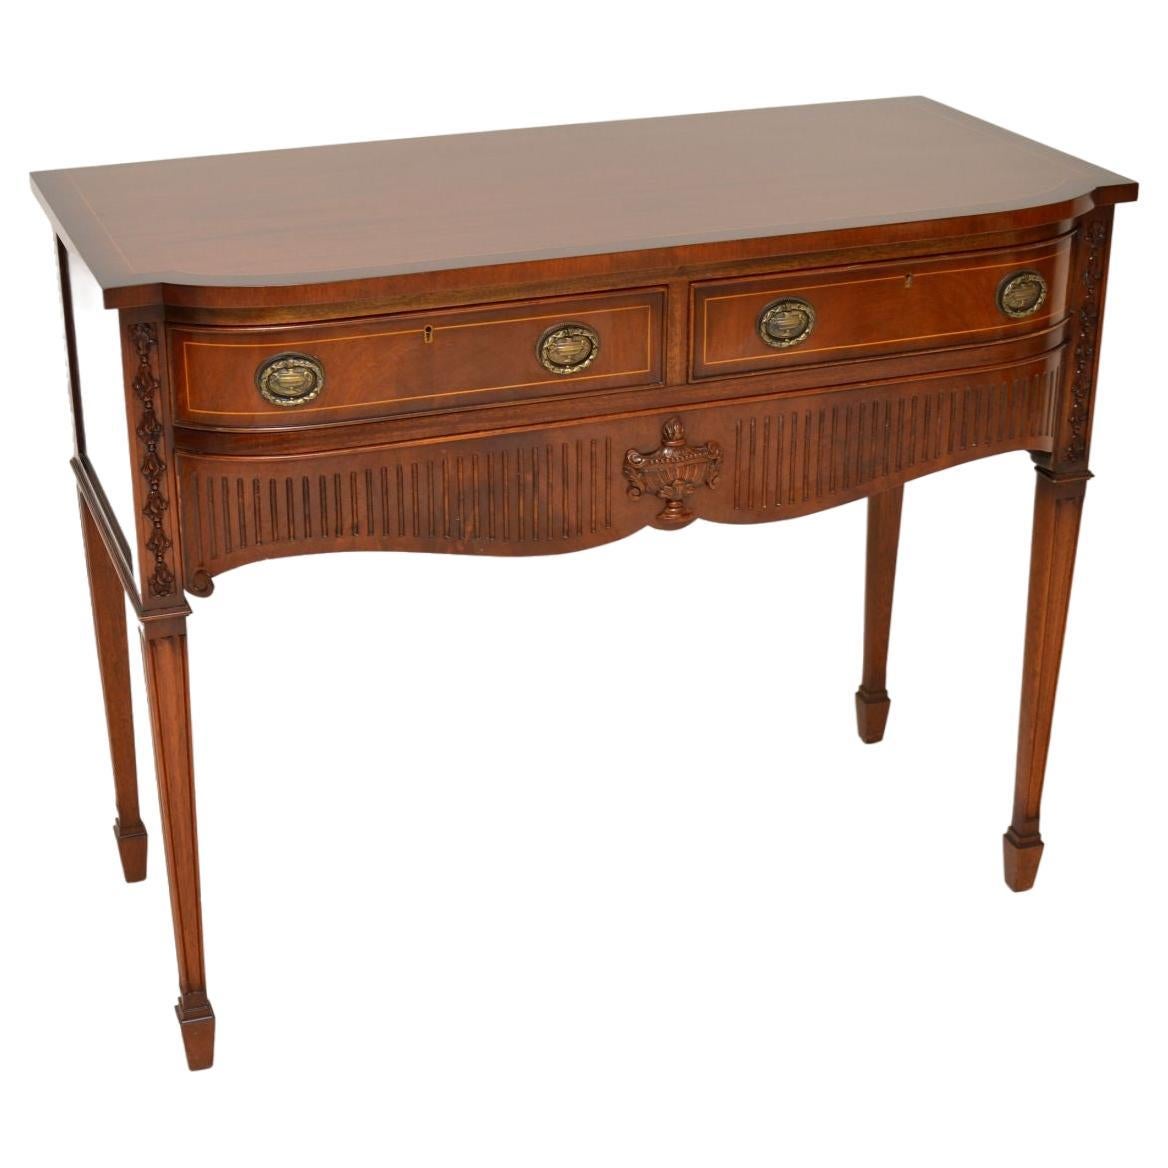 Antique Inlaid Console / Server Table